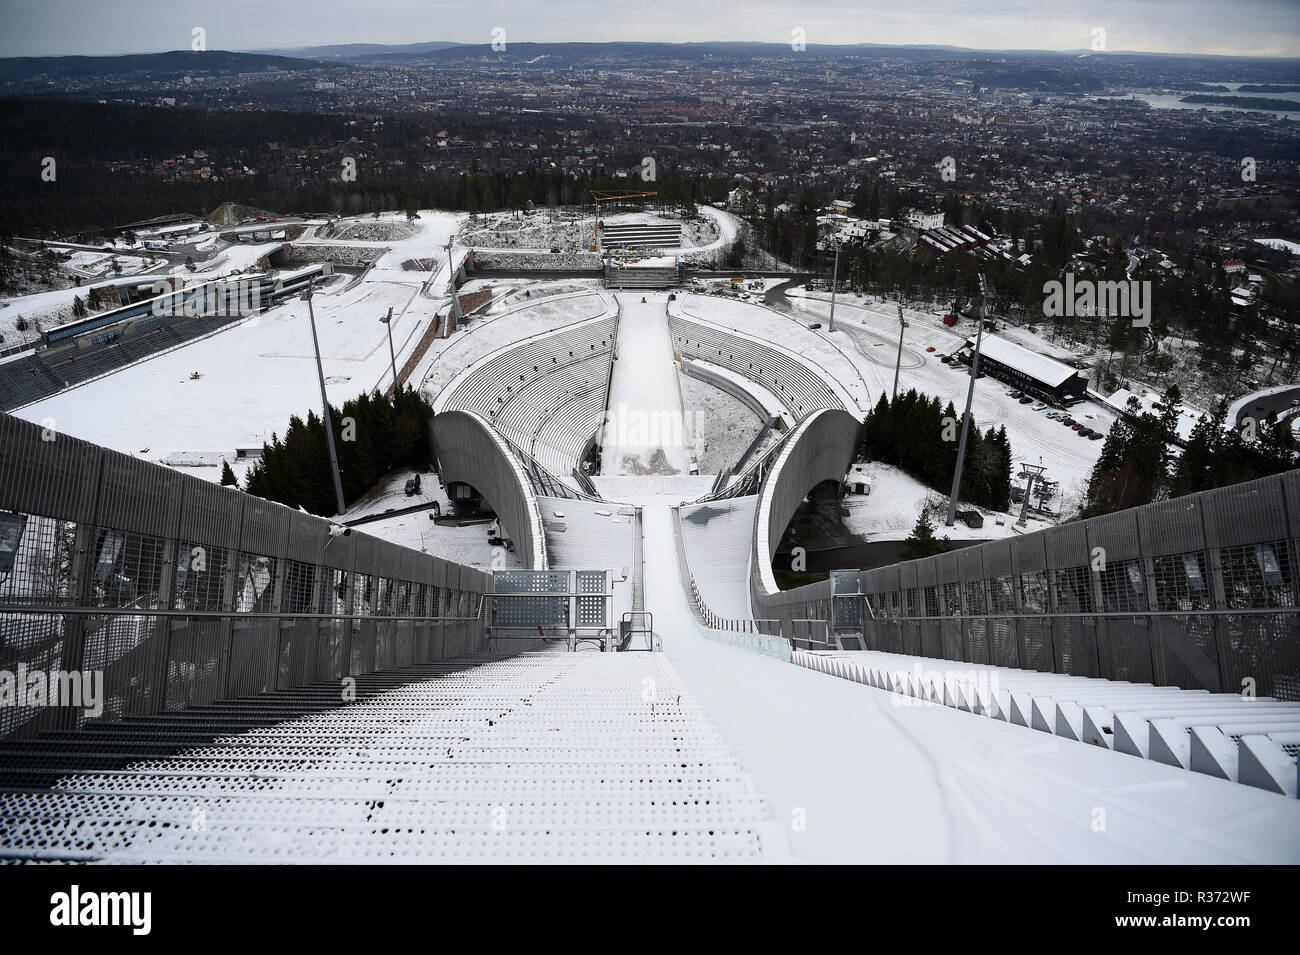 A view from the top of the Holmenkollen ski jump in Oslo, Norway. Stock Photo